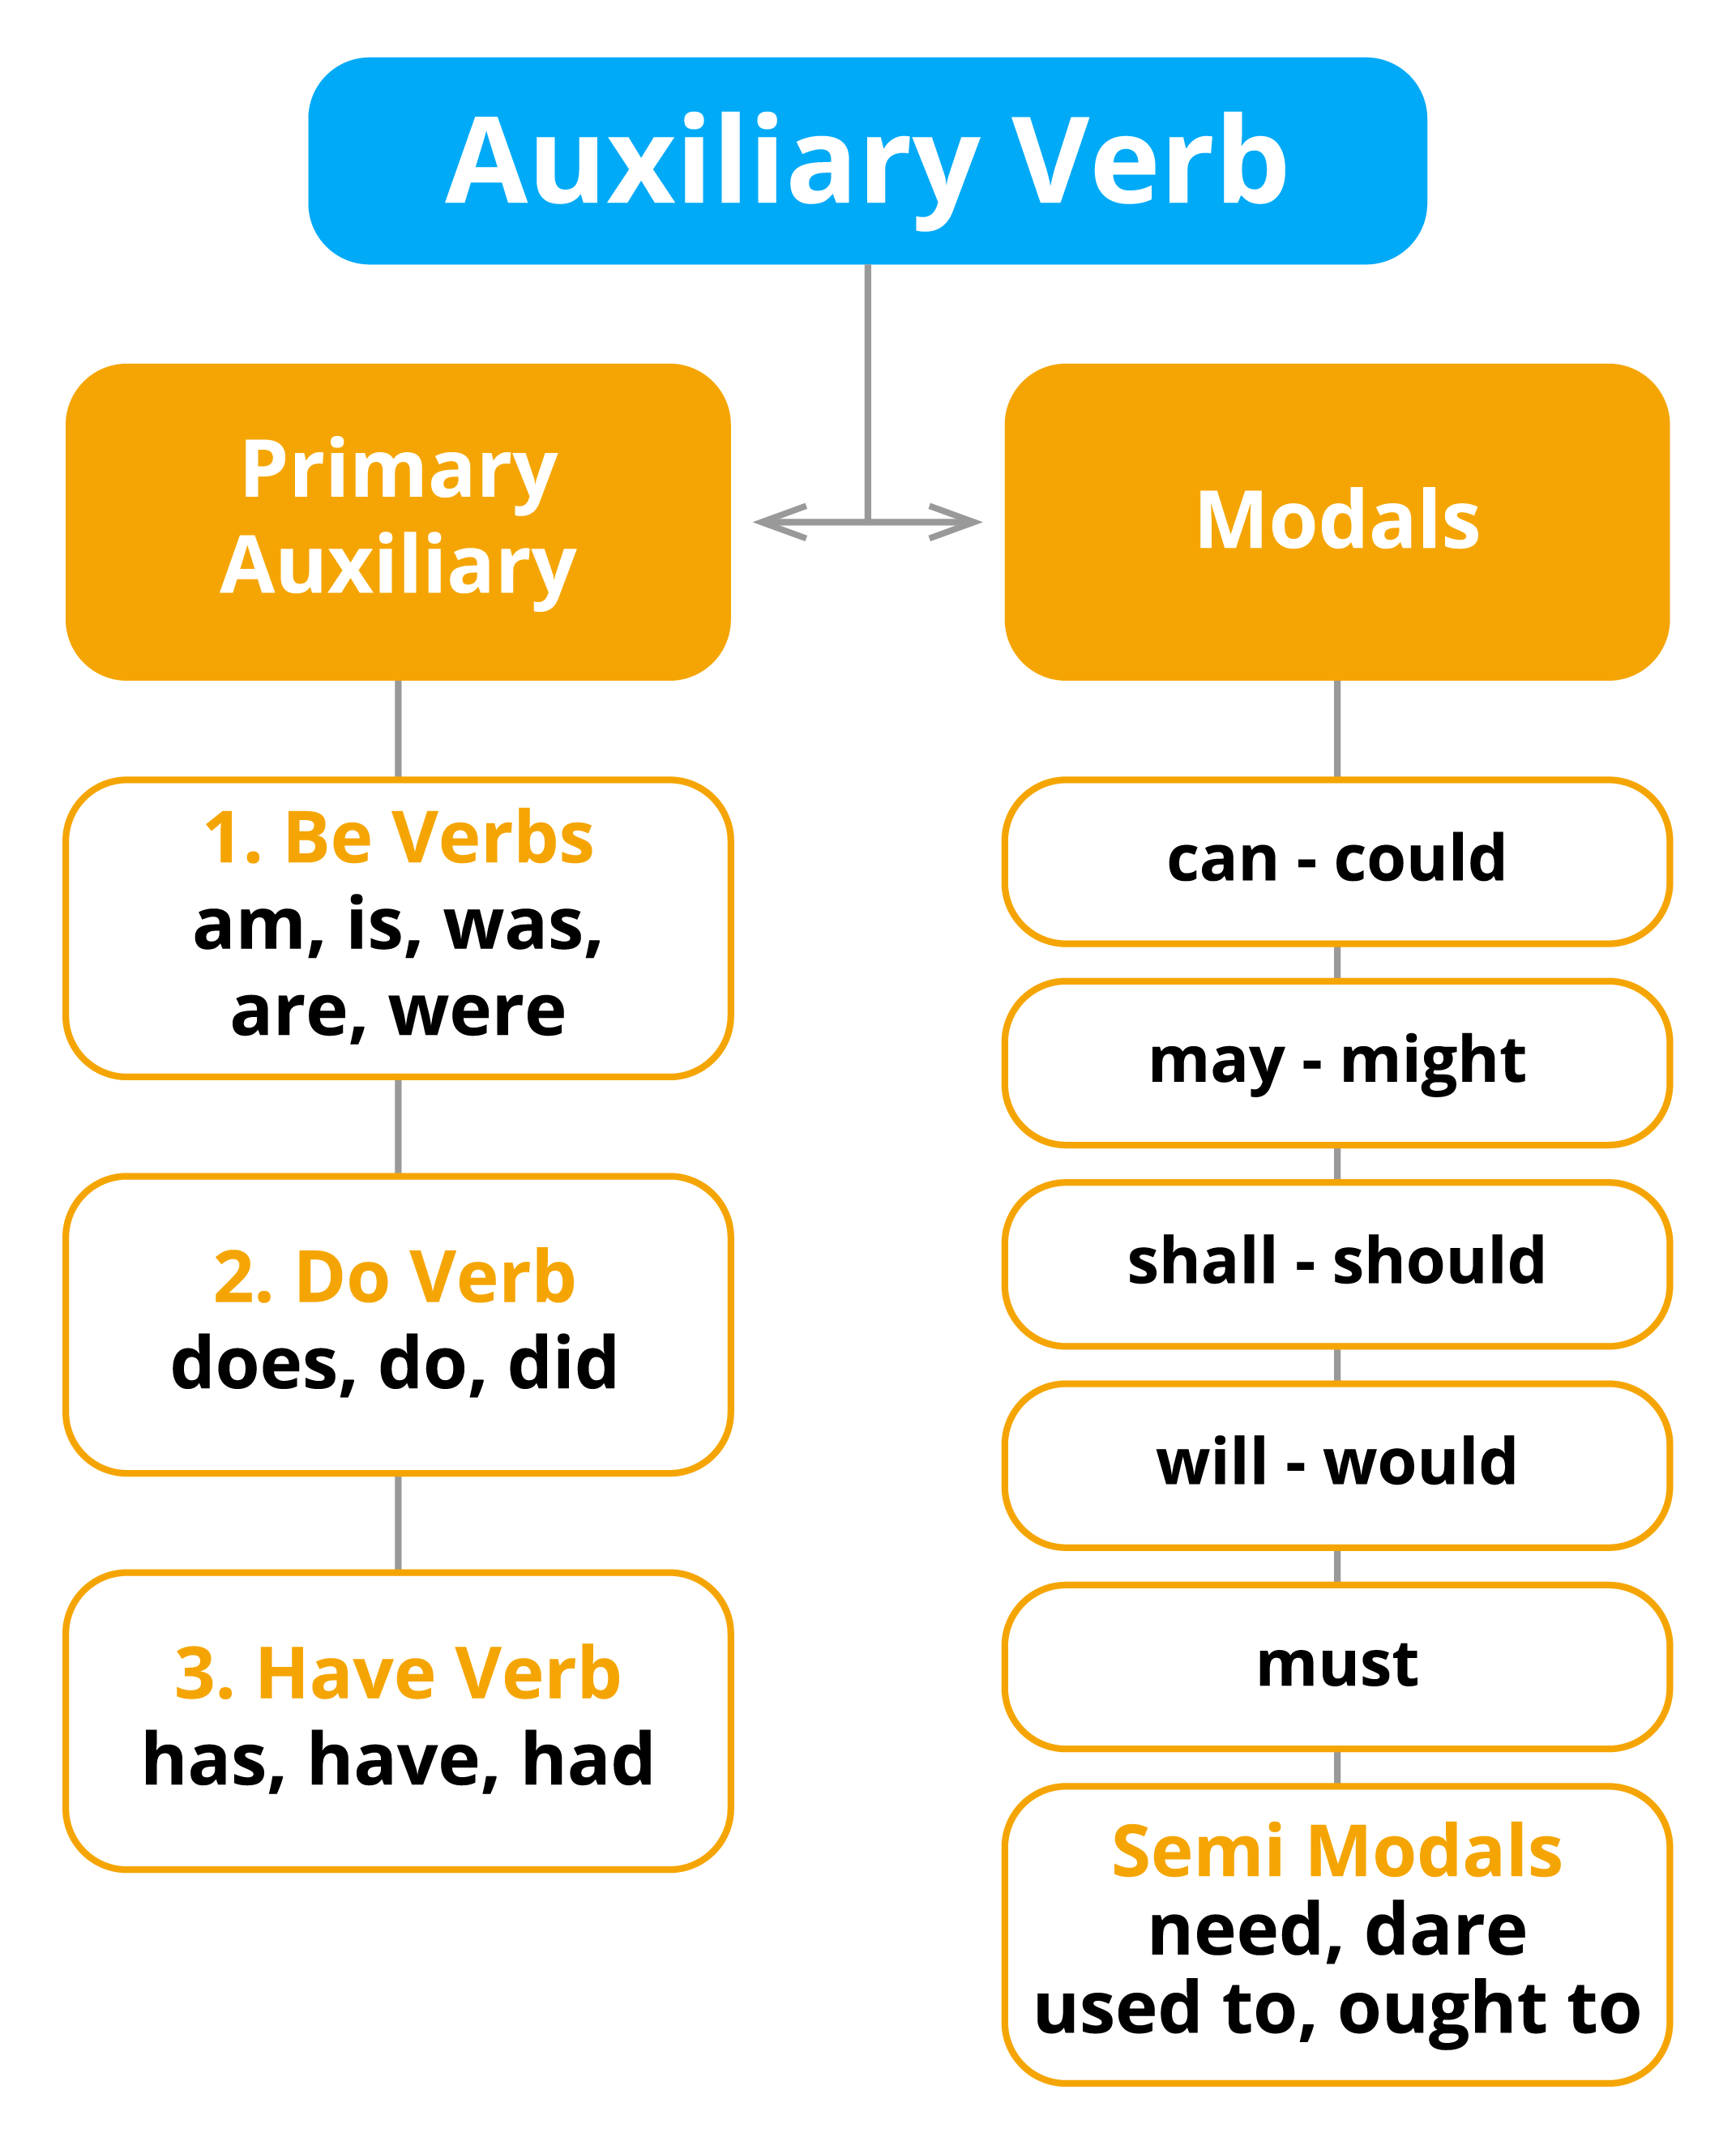 step-by-step-main-and-auxiliary-verbs